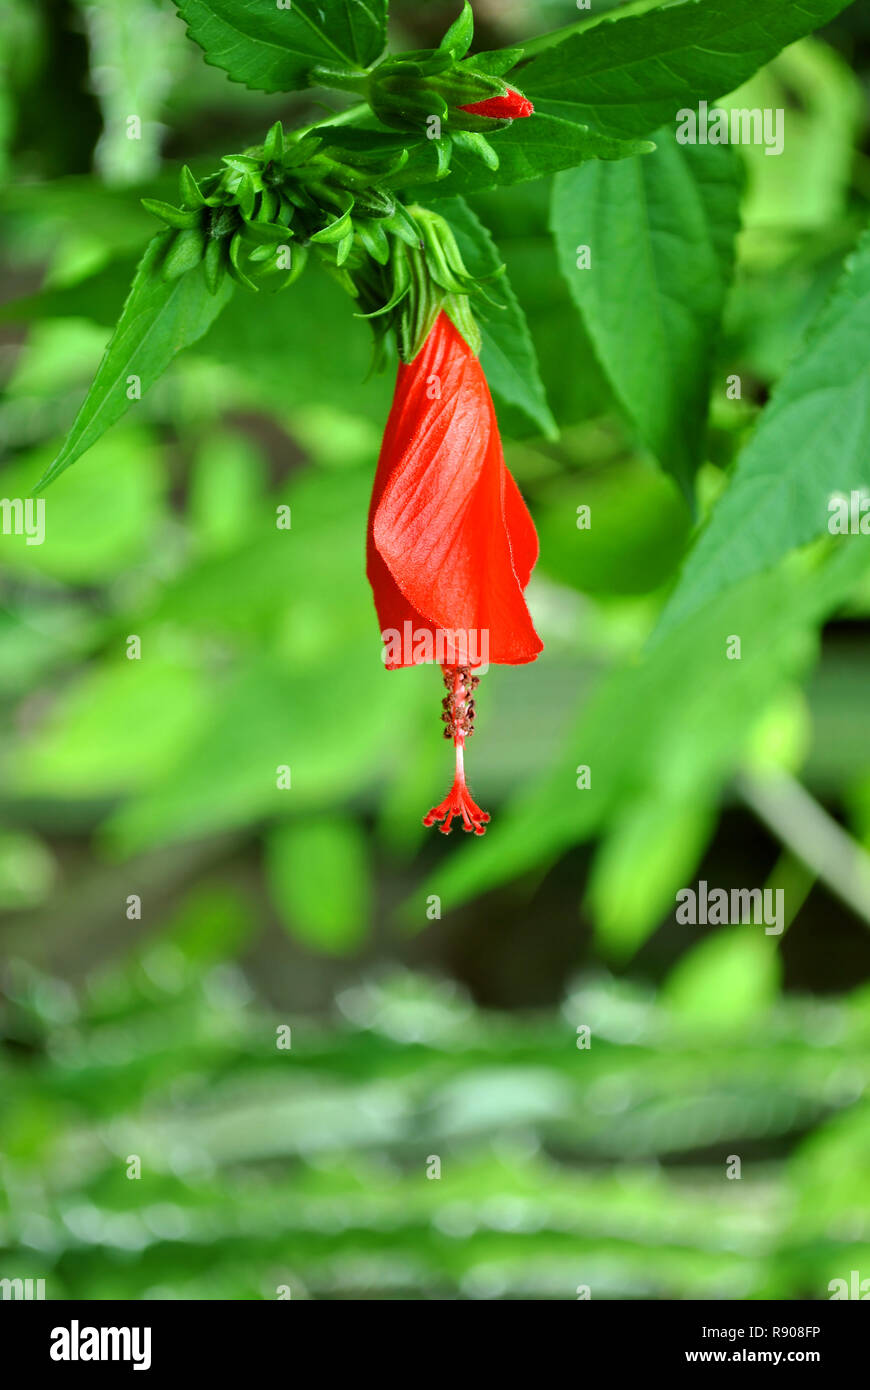 A small single Hibiscus rosa-sinensis flower dangling delicately from a branch Stock Photo